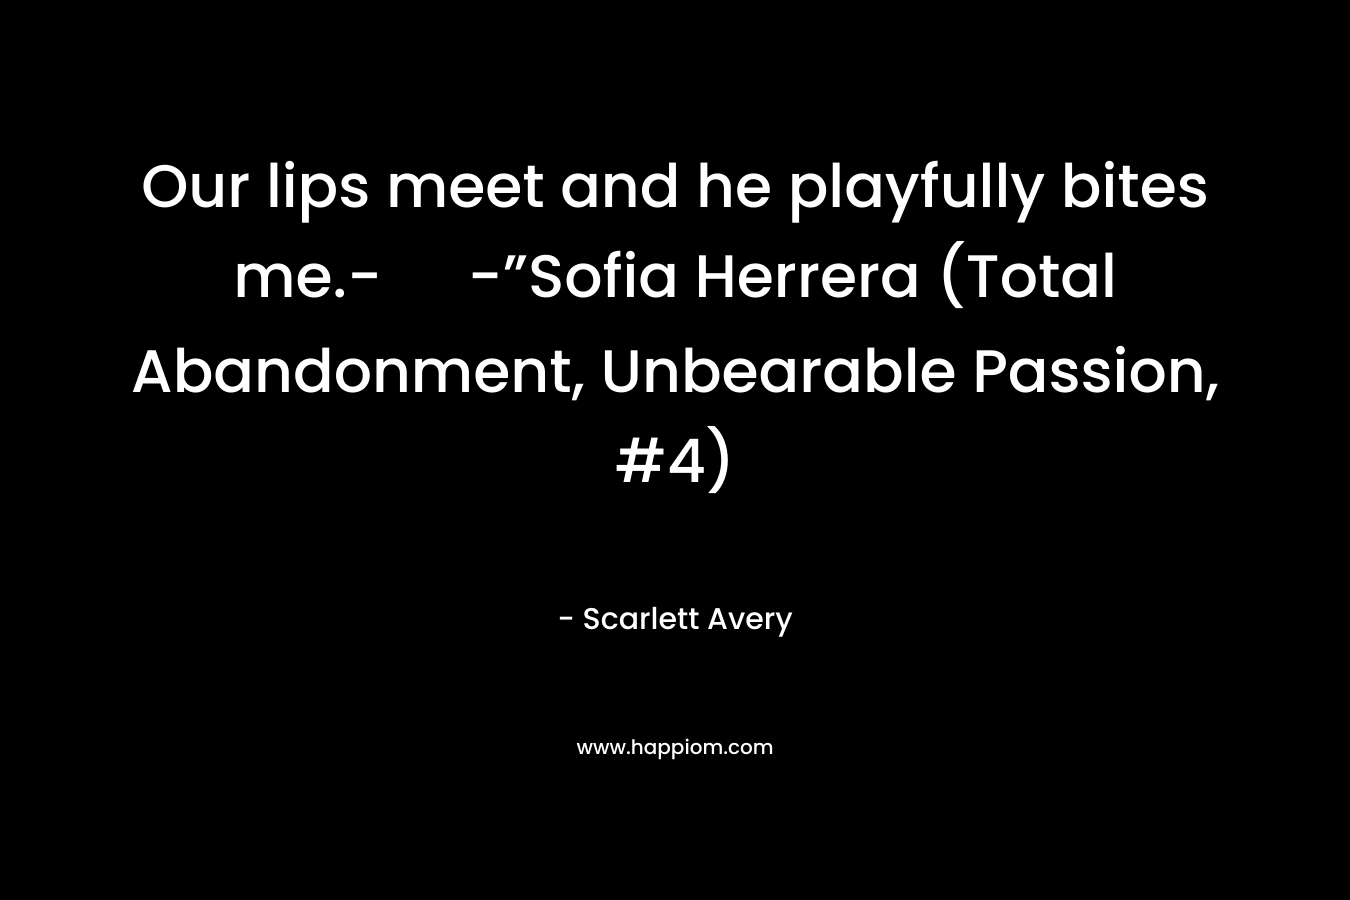 Our lips meet and he playfully bites me.- -”Sofia Herrera (Total Abandonment, Unbearable Passion, #4) – Scarlett Avery